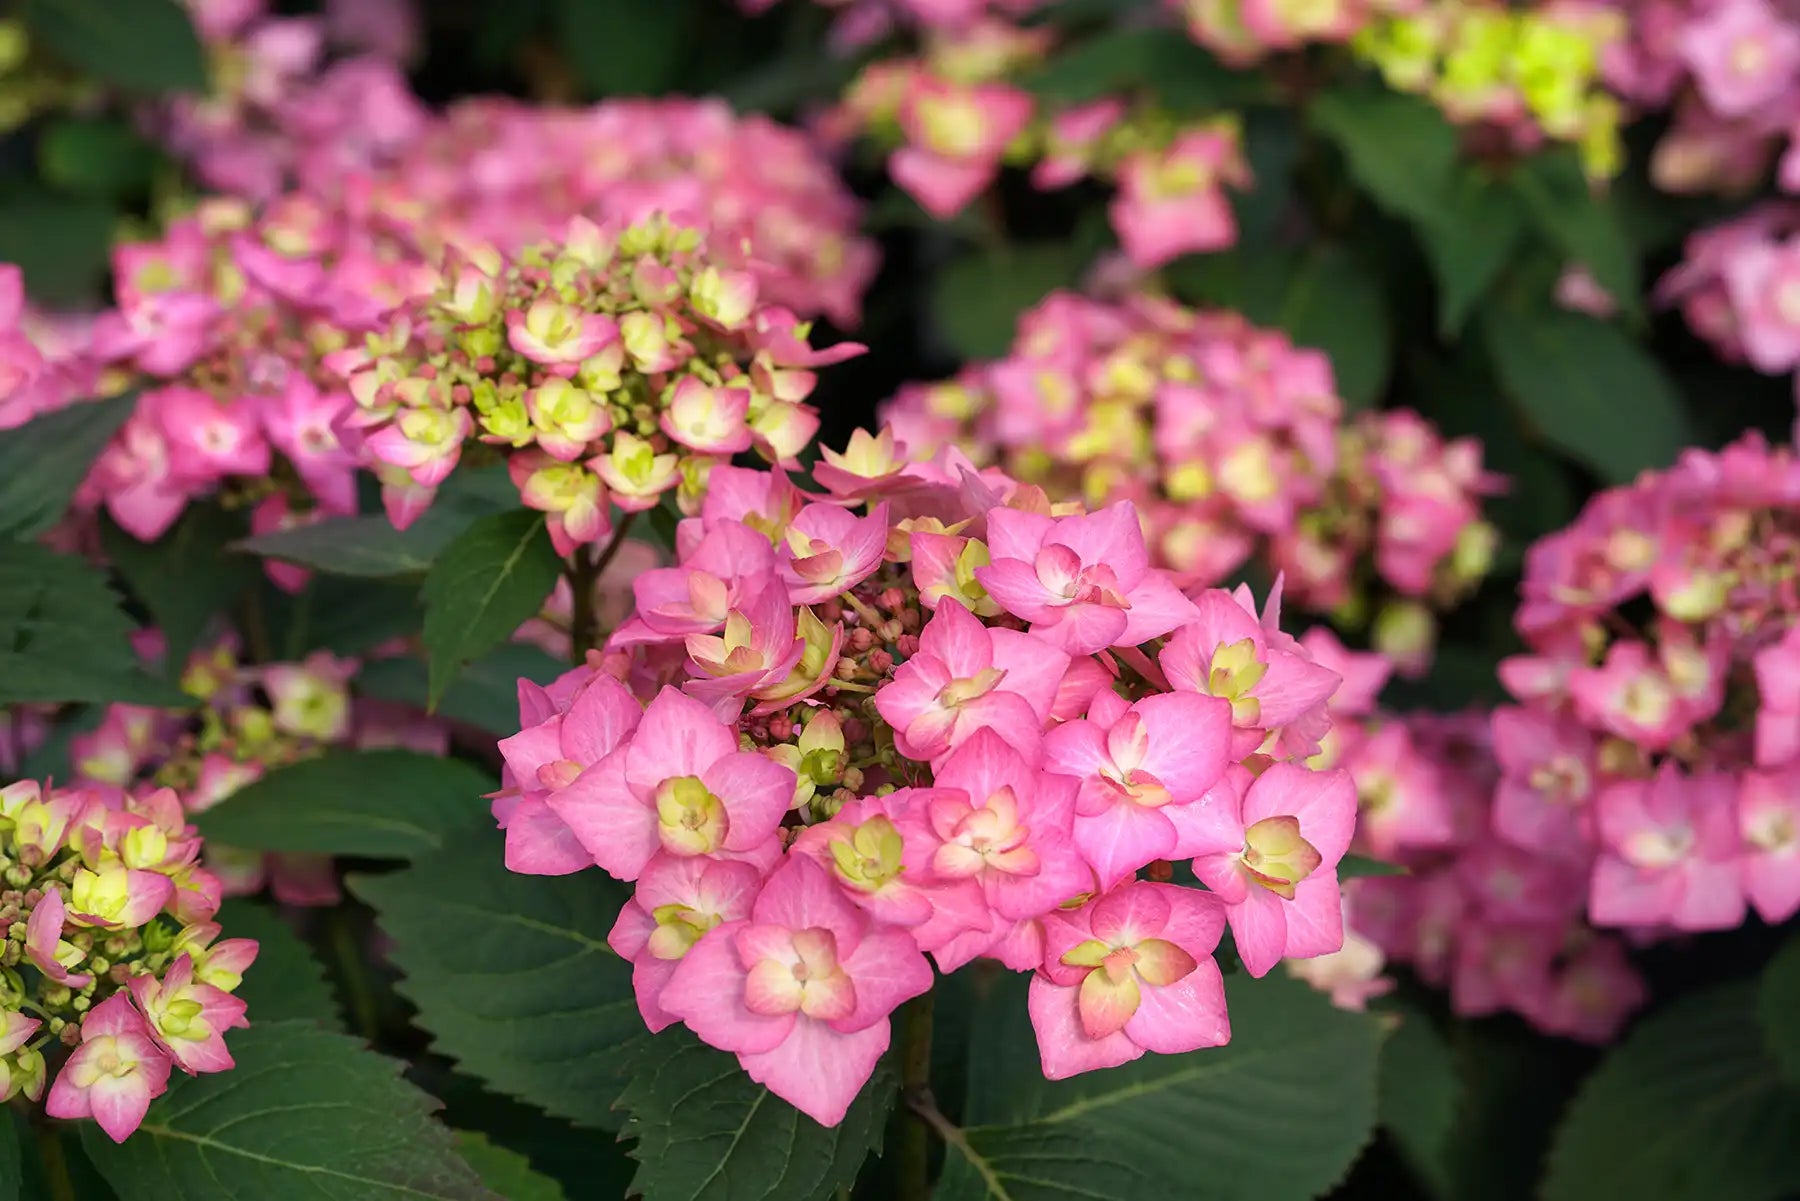 Closeup clusters of pink flowers with lime yellow-to-white-centers of Let's Dance Can Do!® Hydrangea show off their beauty. They're nicely framed by their characteristic dark green, big leaf foliage.